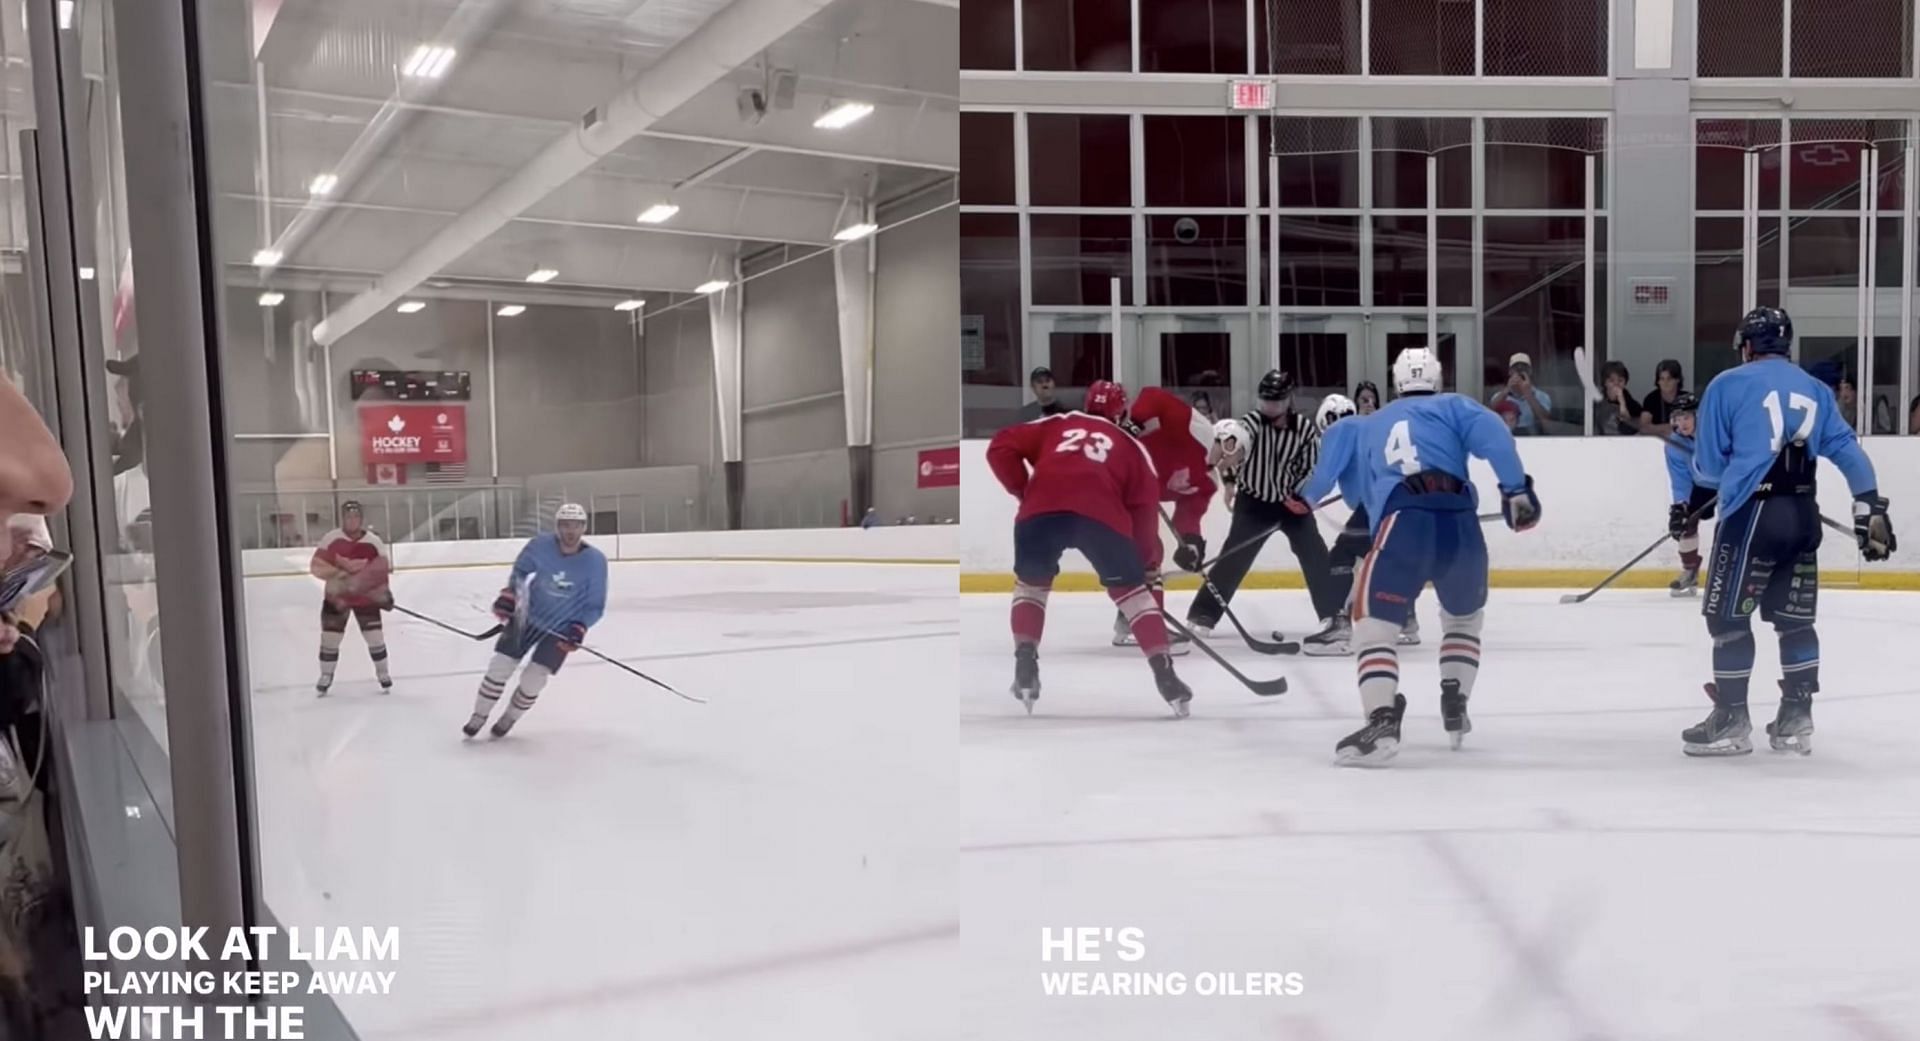 Connor McDavid shows up to beer league hockey game, team loses in